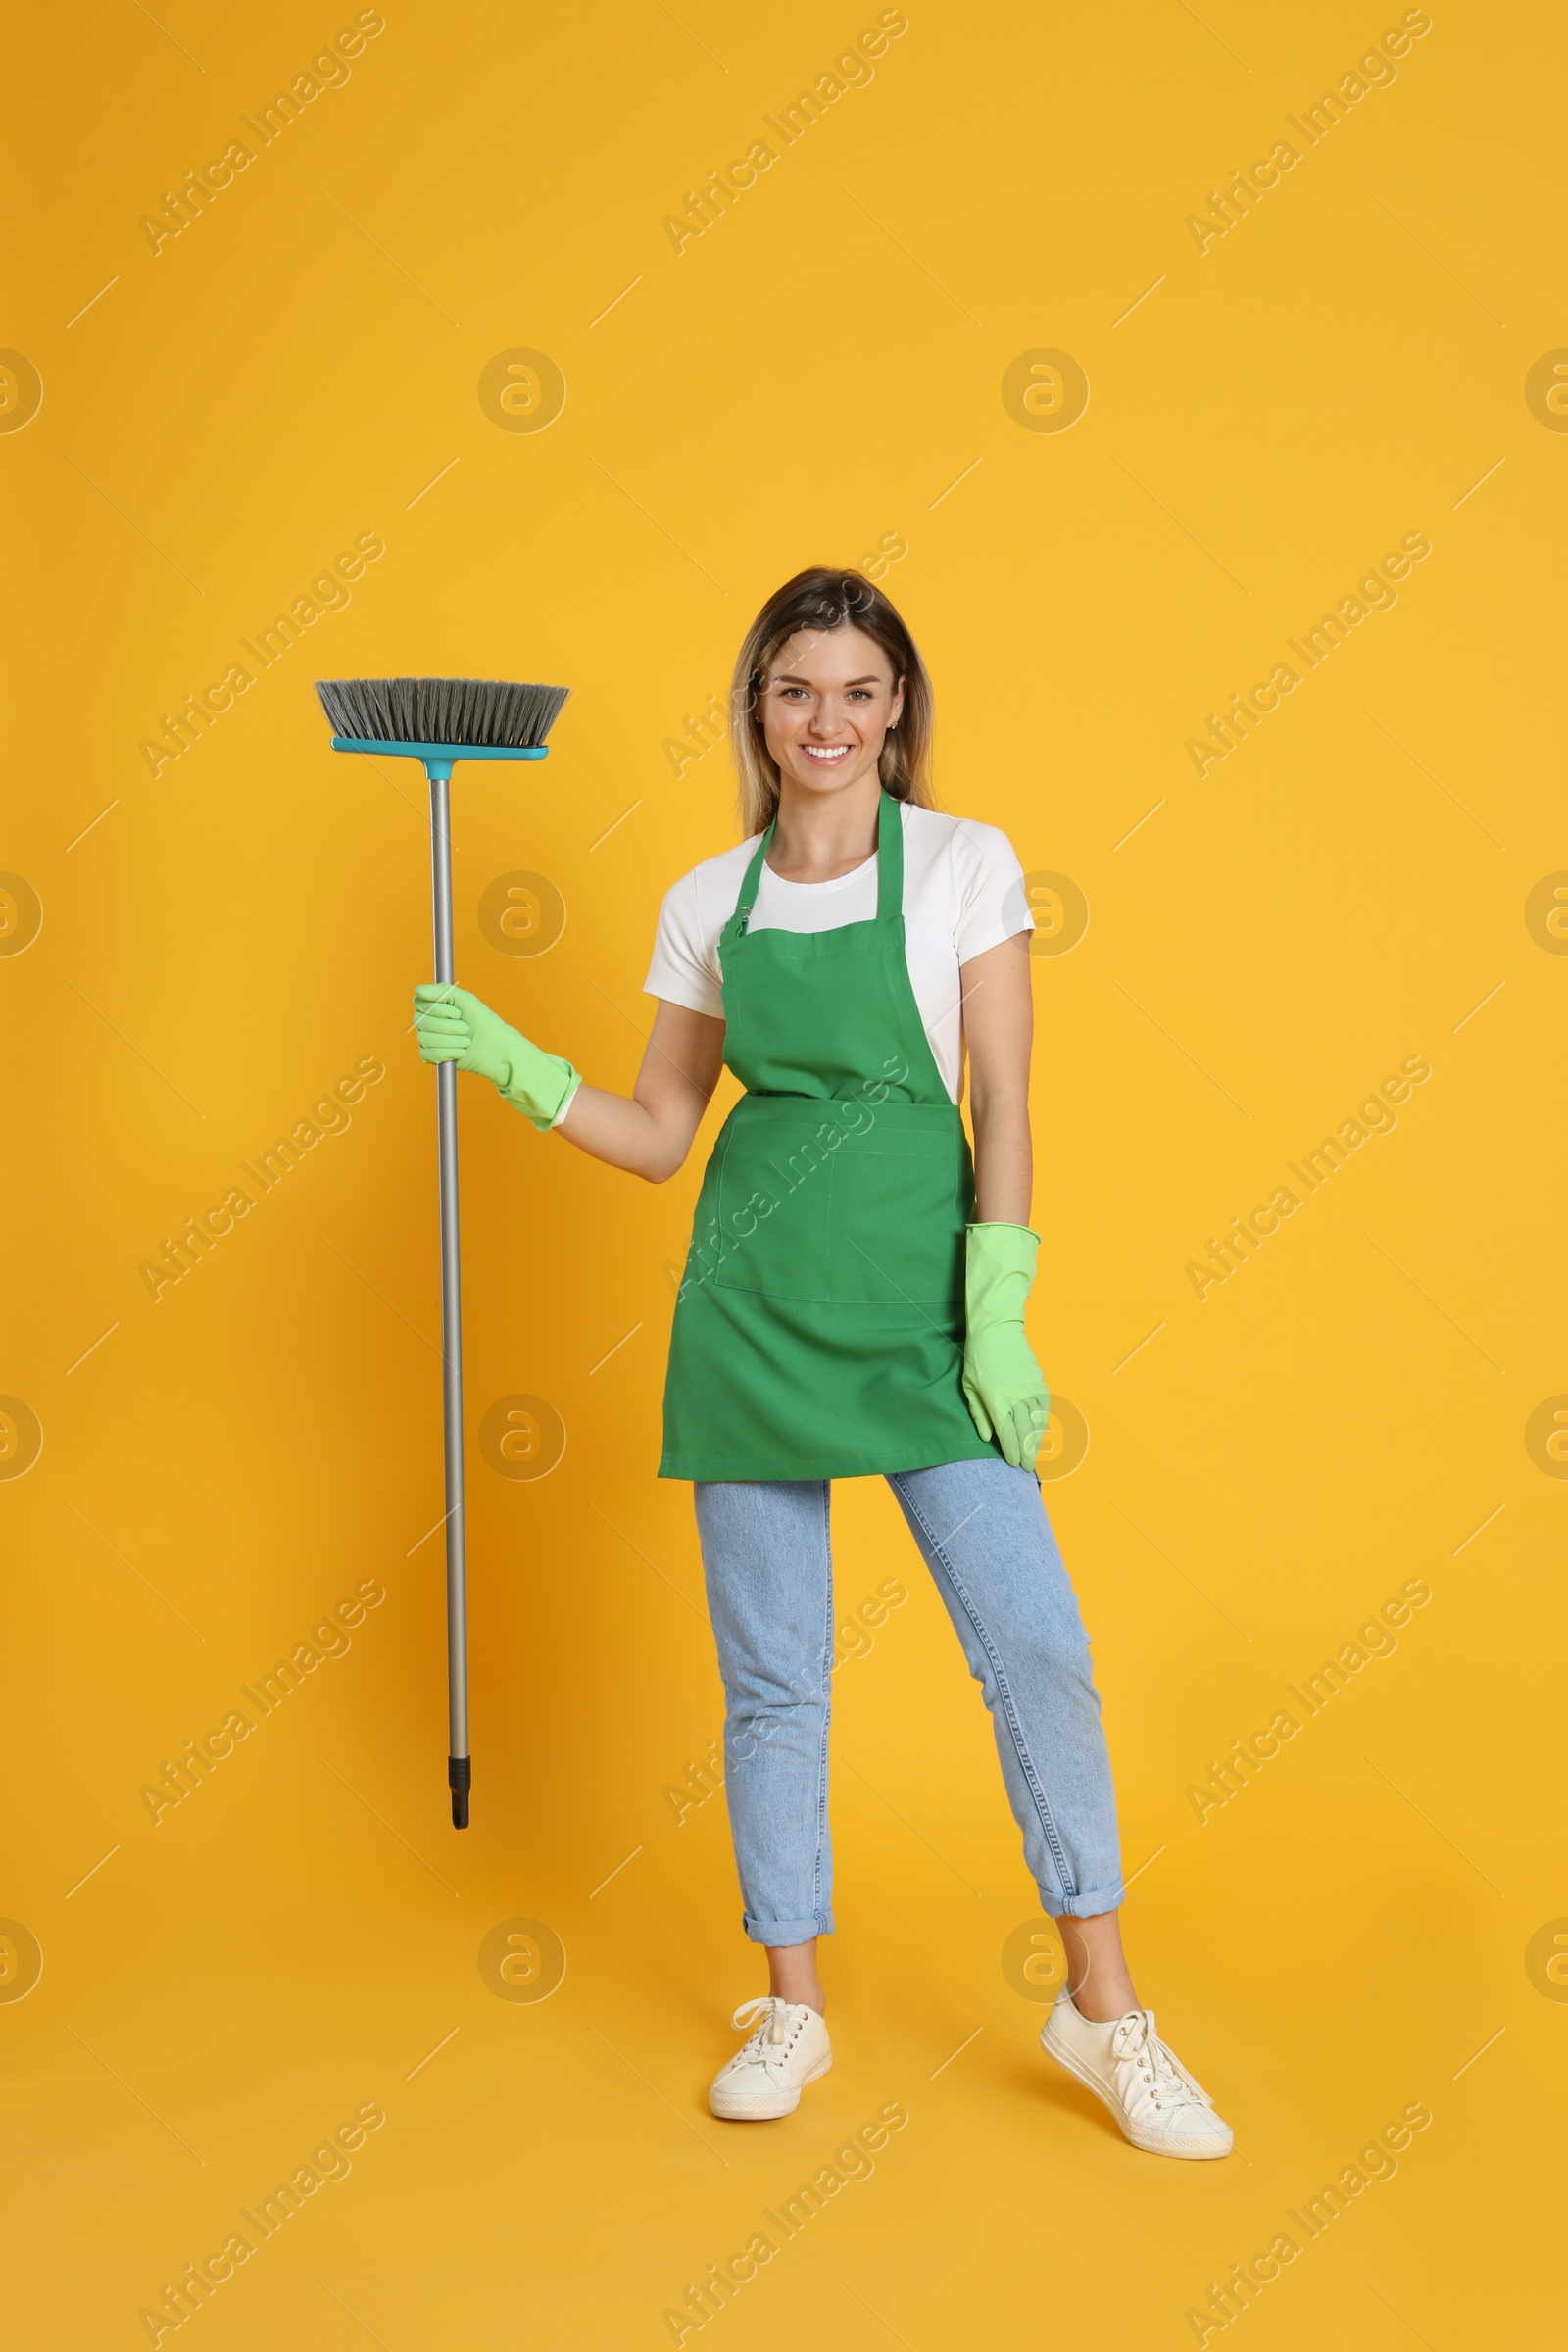 Photo of Young woman with broom on orange background